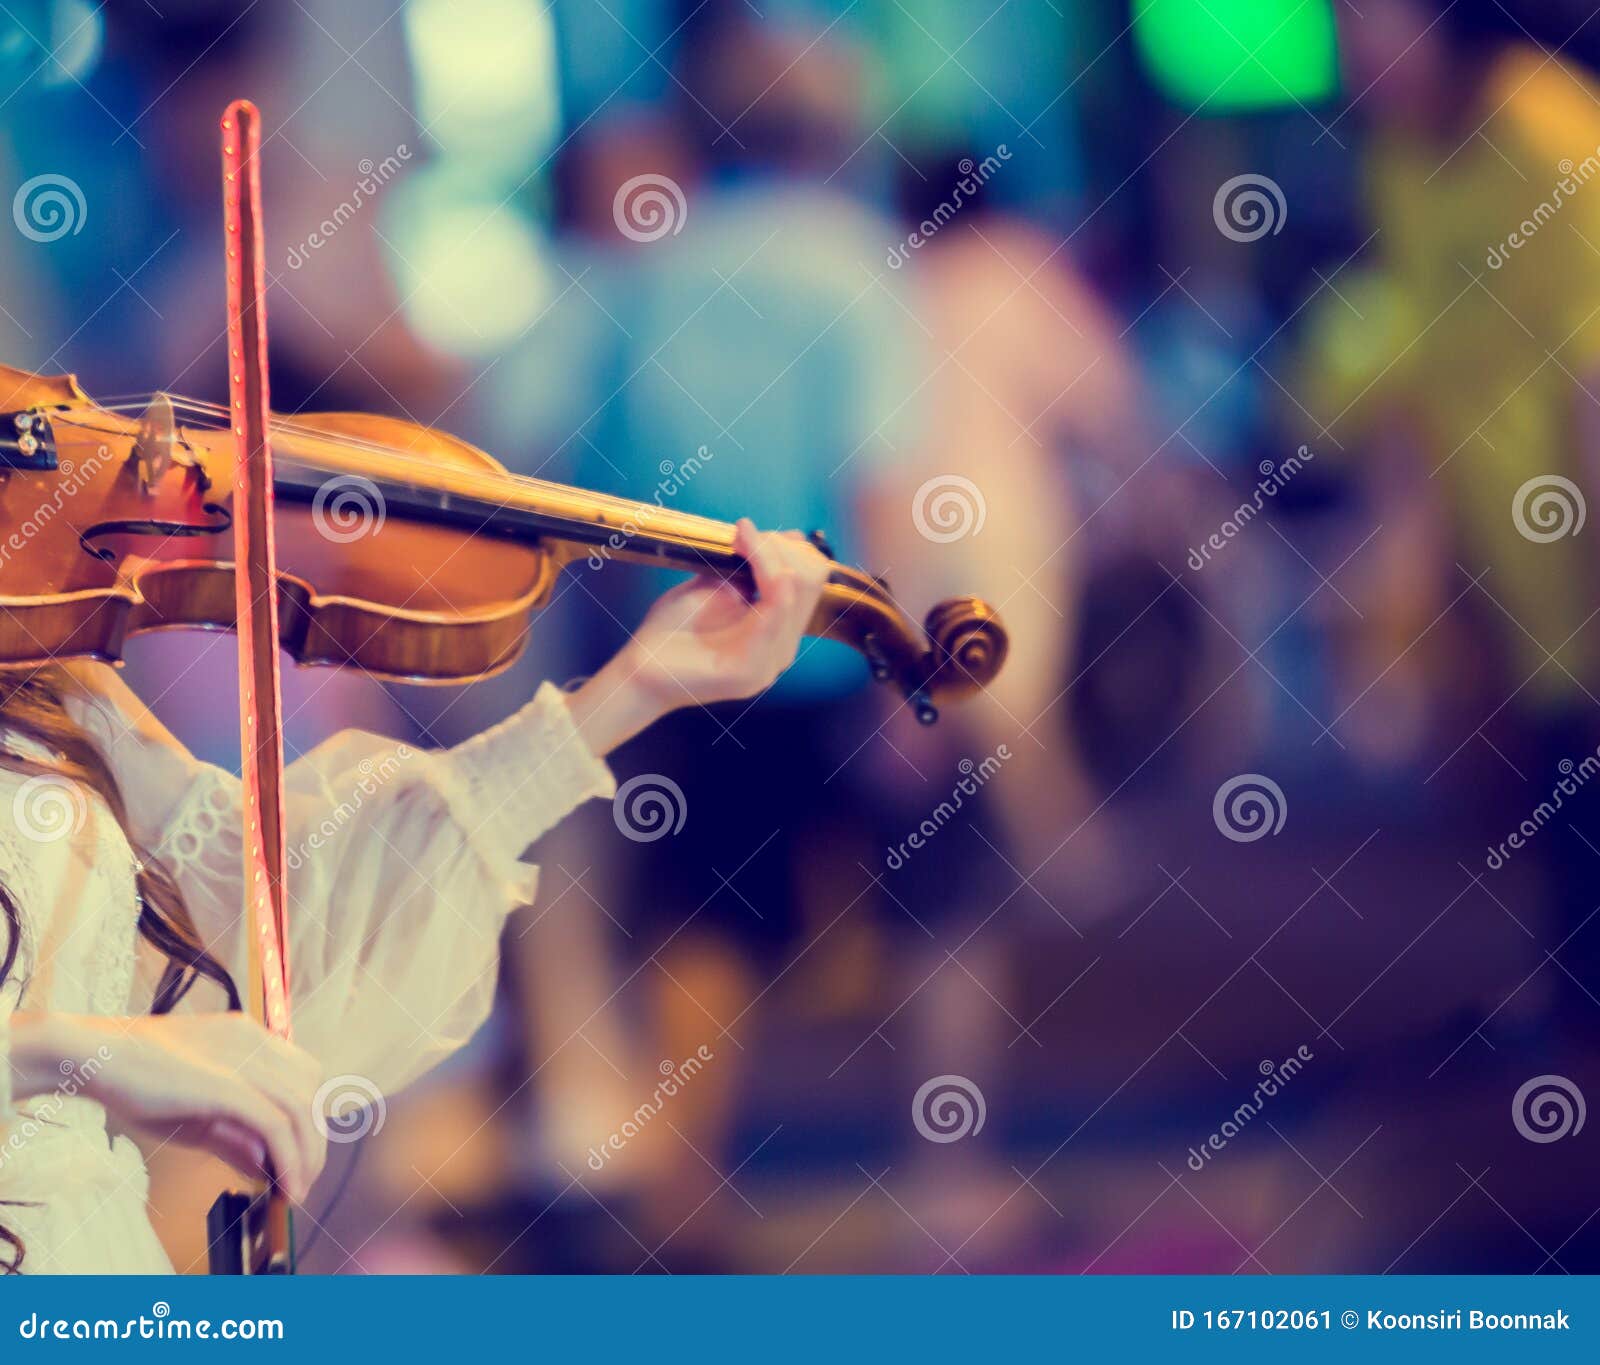 The Beautiful Girl is Playing the Violin. Orchestra Concept Stock Image - Image of people: 167102061